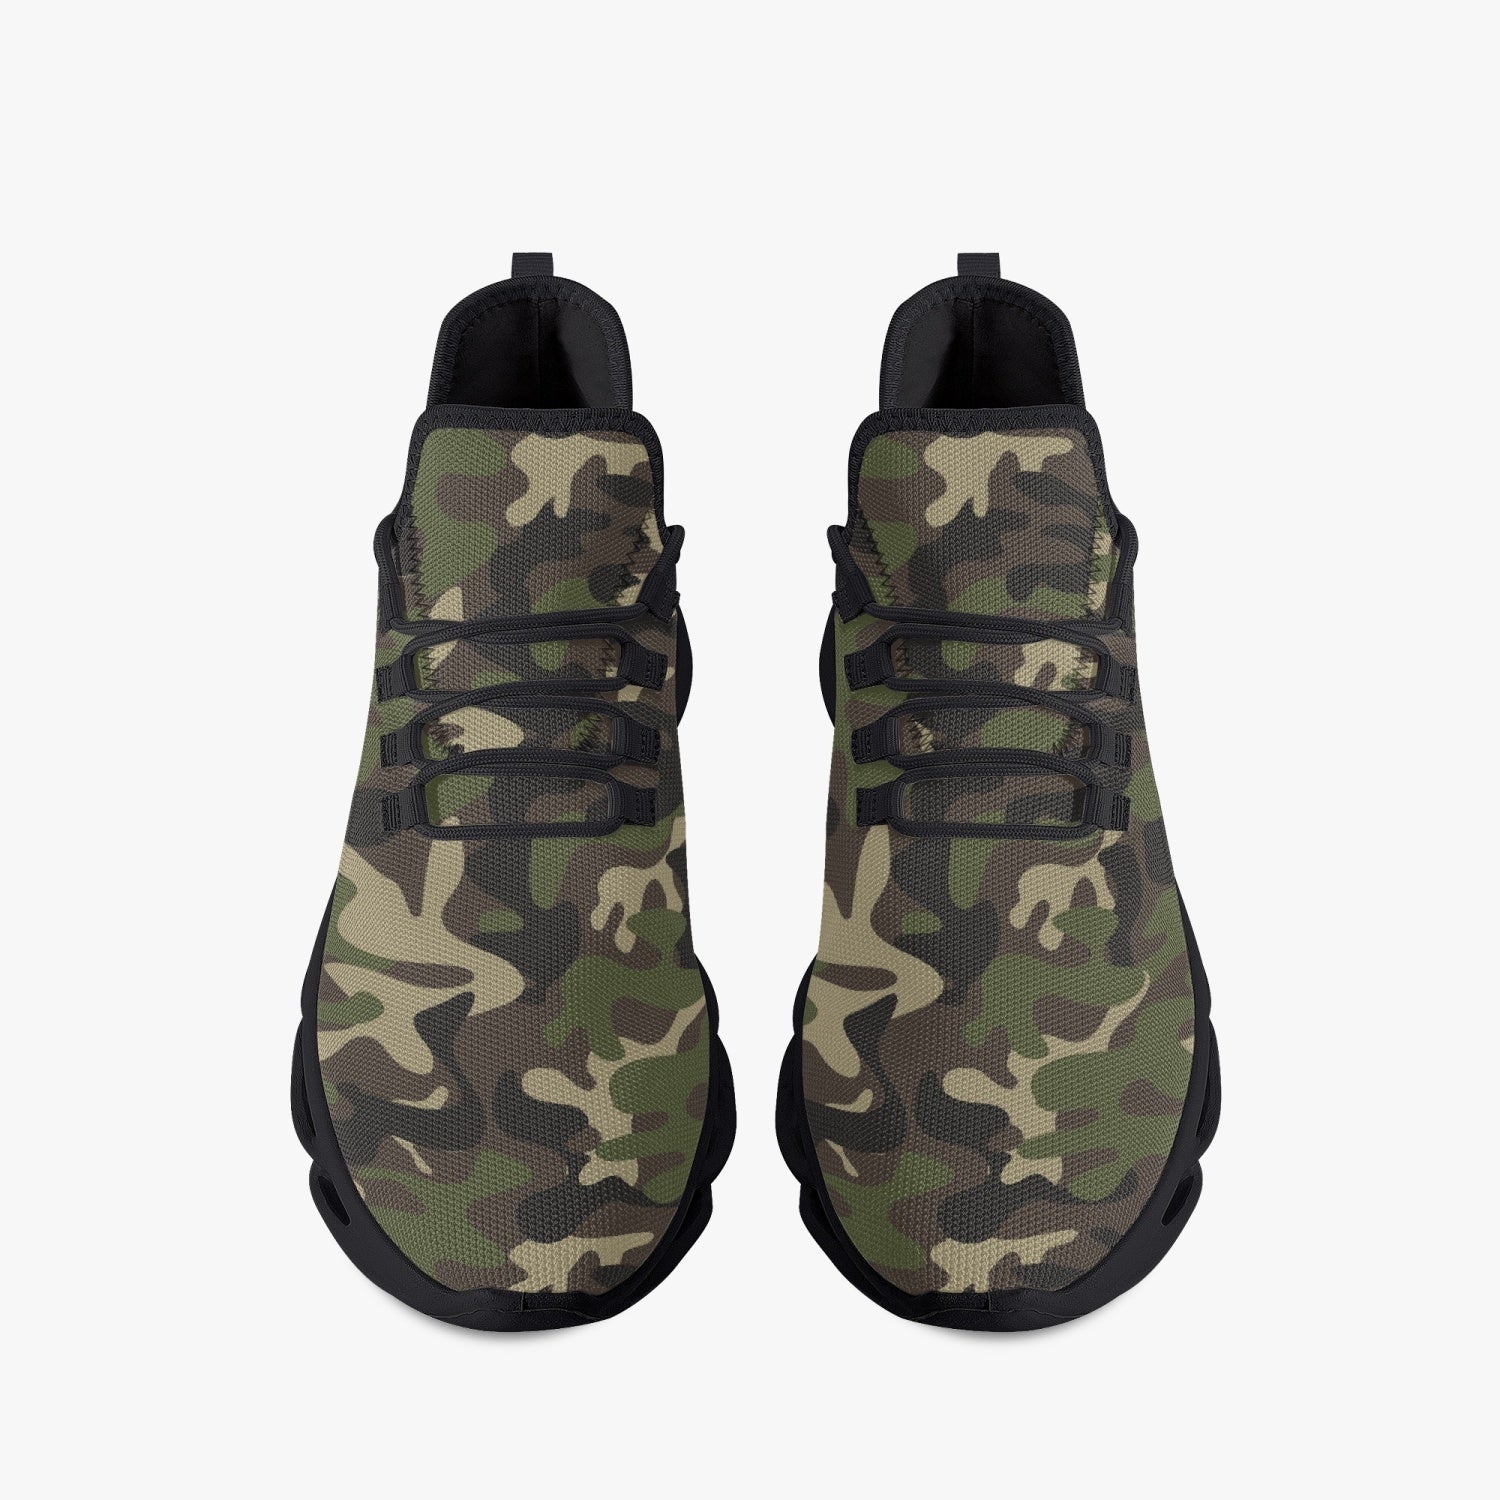 Buy Skechers Street Uno - in camo Neato Lace Up Shoes for Women -  Air-Cooled Memory Foam Insole Cushioned Midsole Synthetic durabuck Sneakers  Shoes at Amazon.in